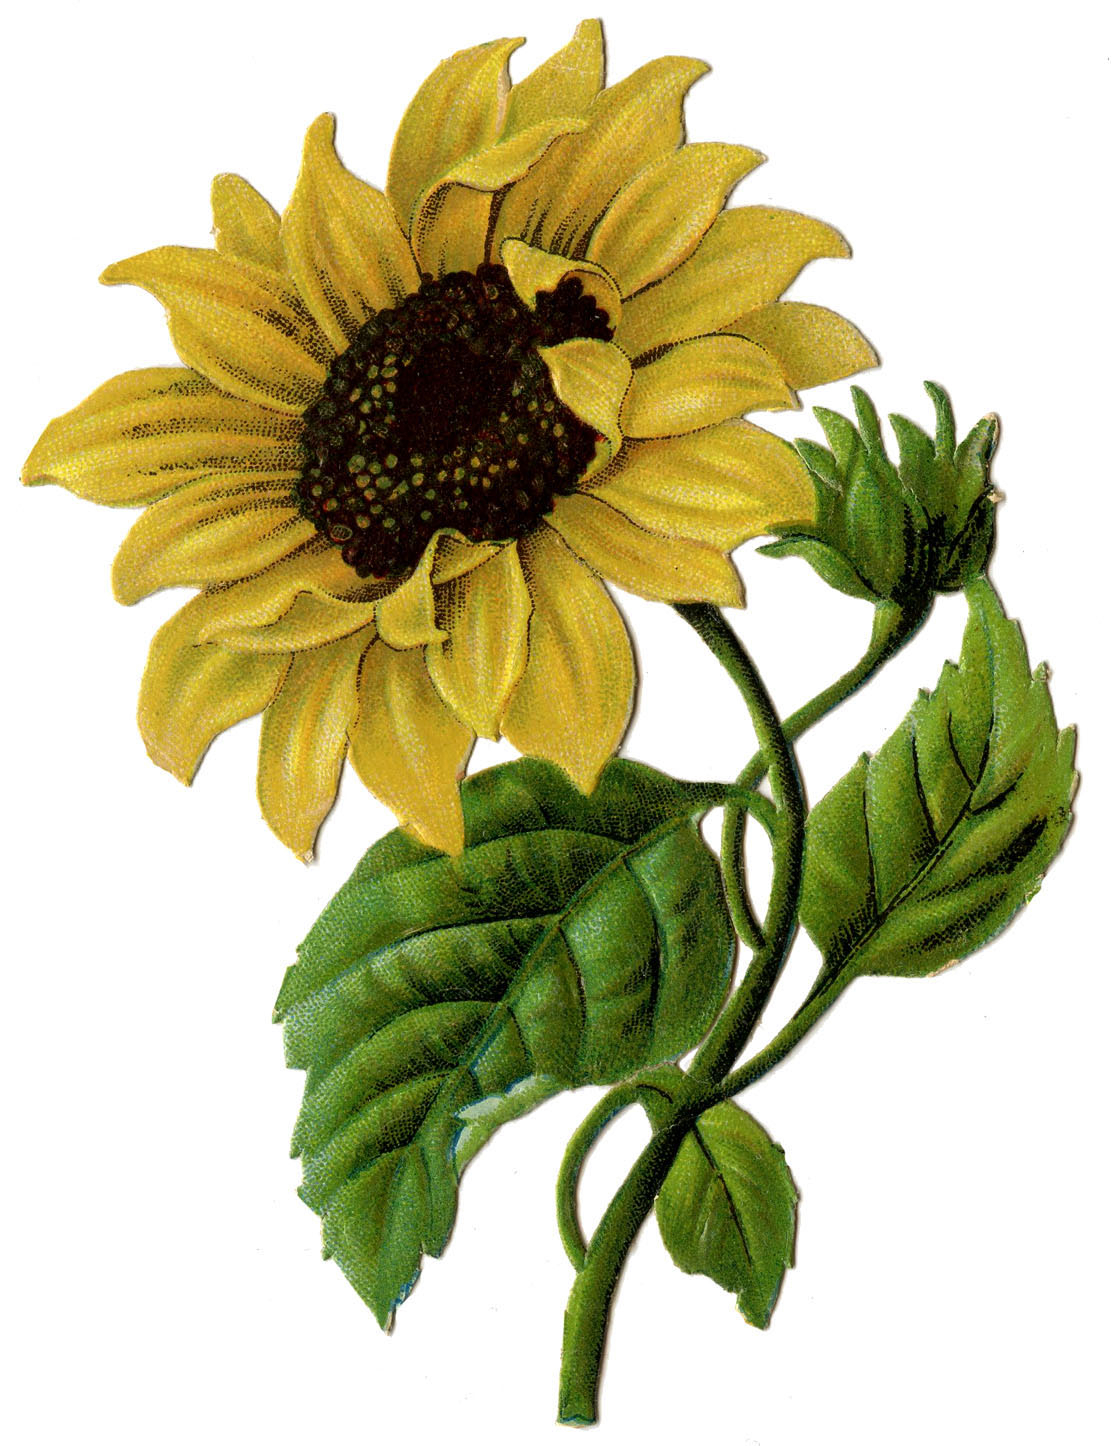 9 Sunflower Images Beautiful Pictures The Graphics Fairy